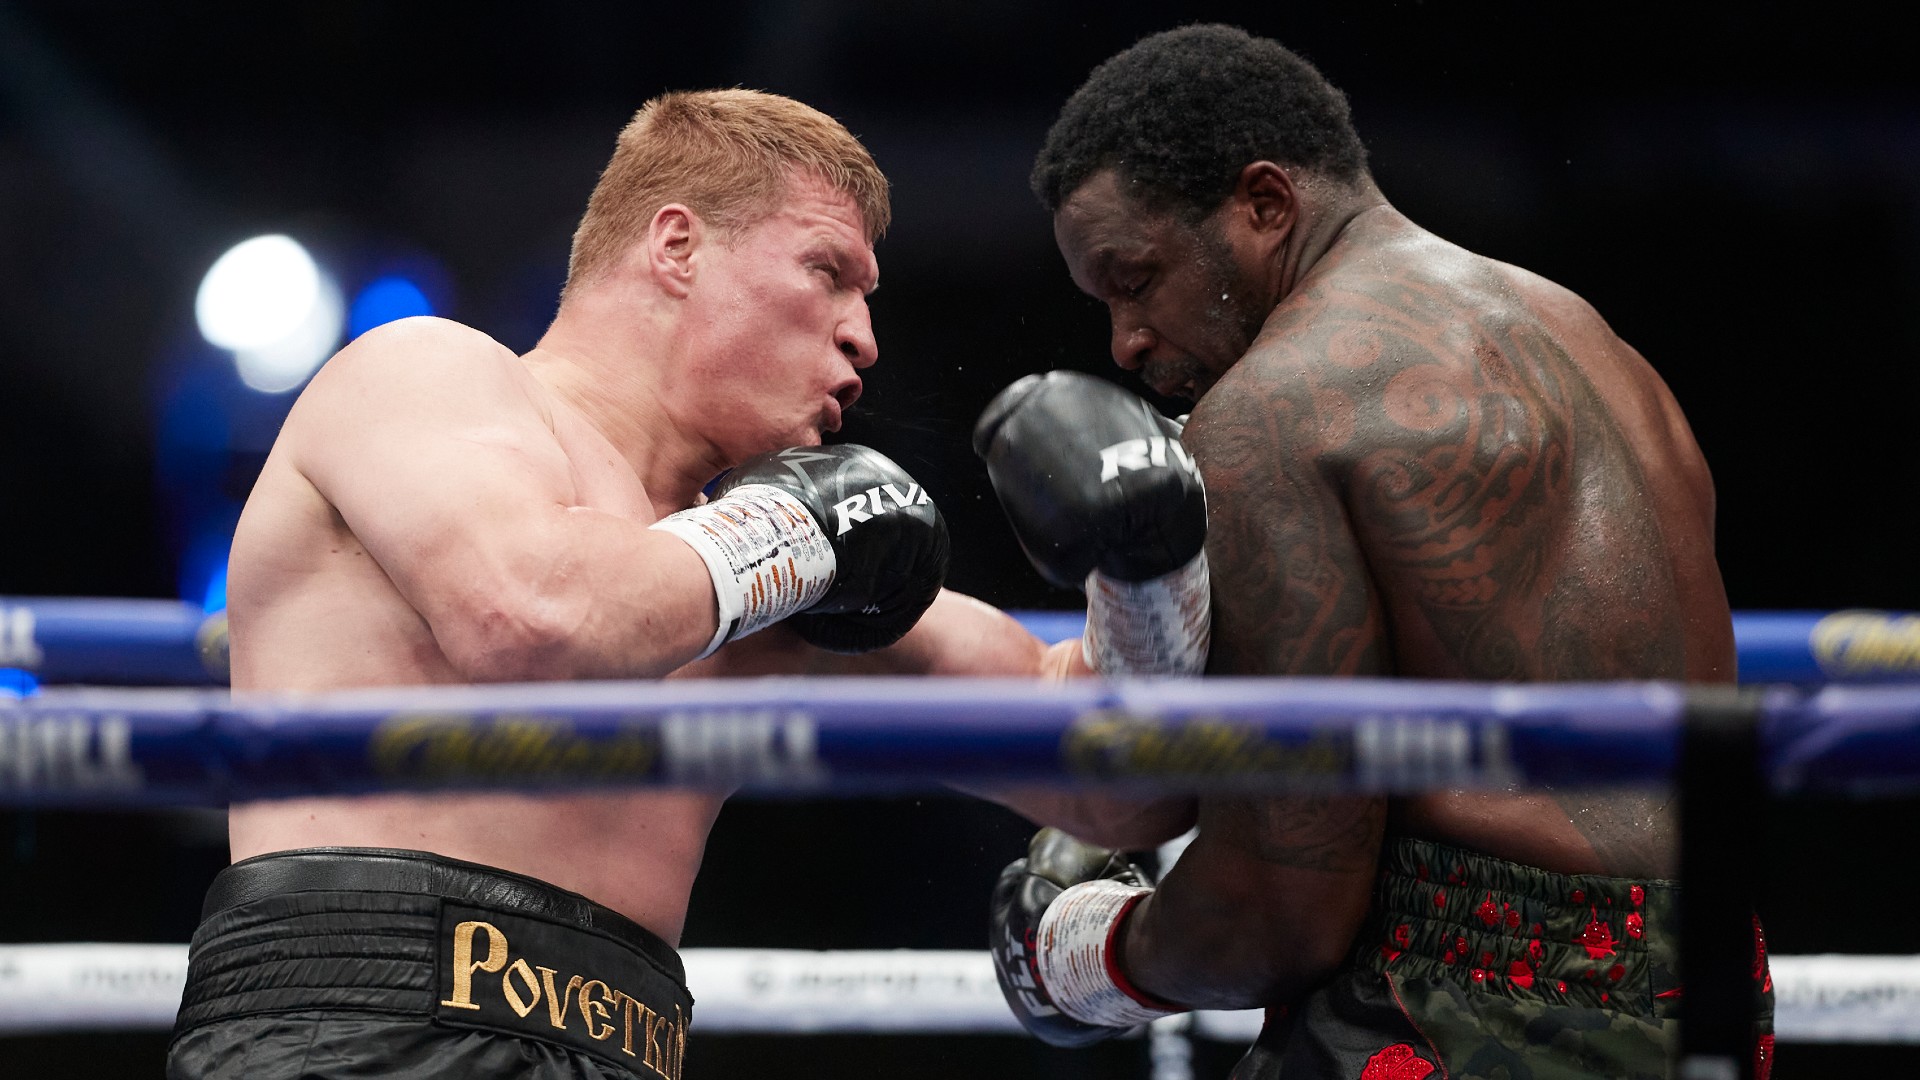 Alexander Povetkin & Dillian Whyte (Matchroom Boxing)